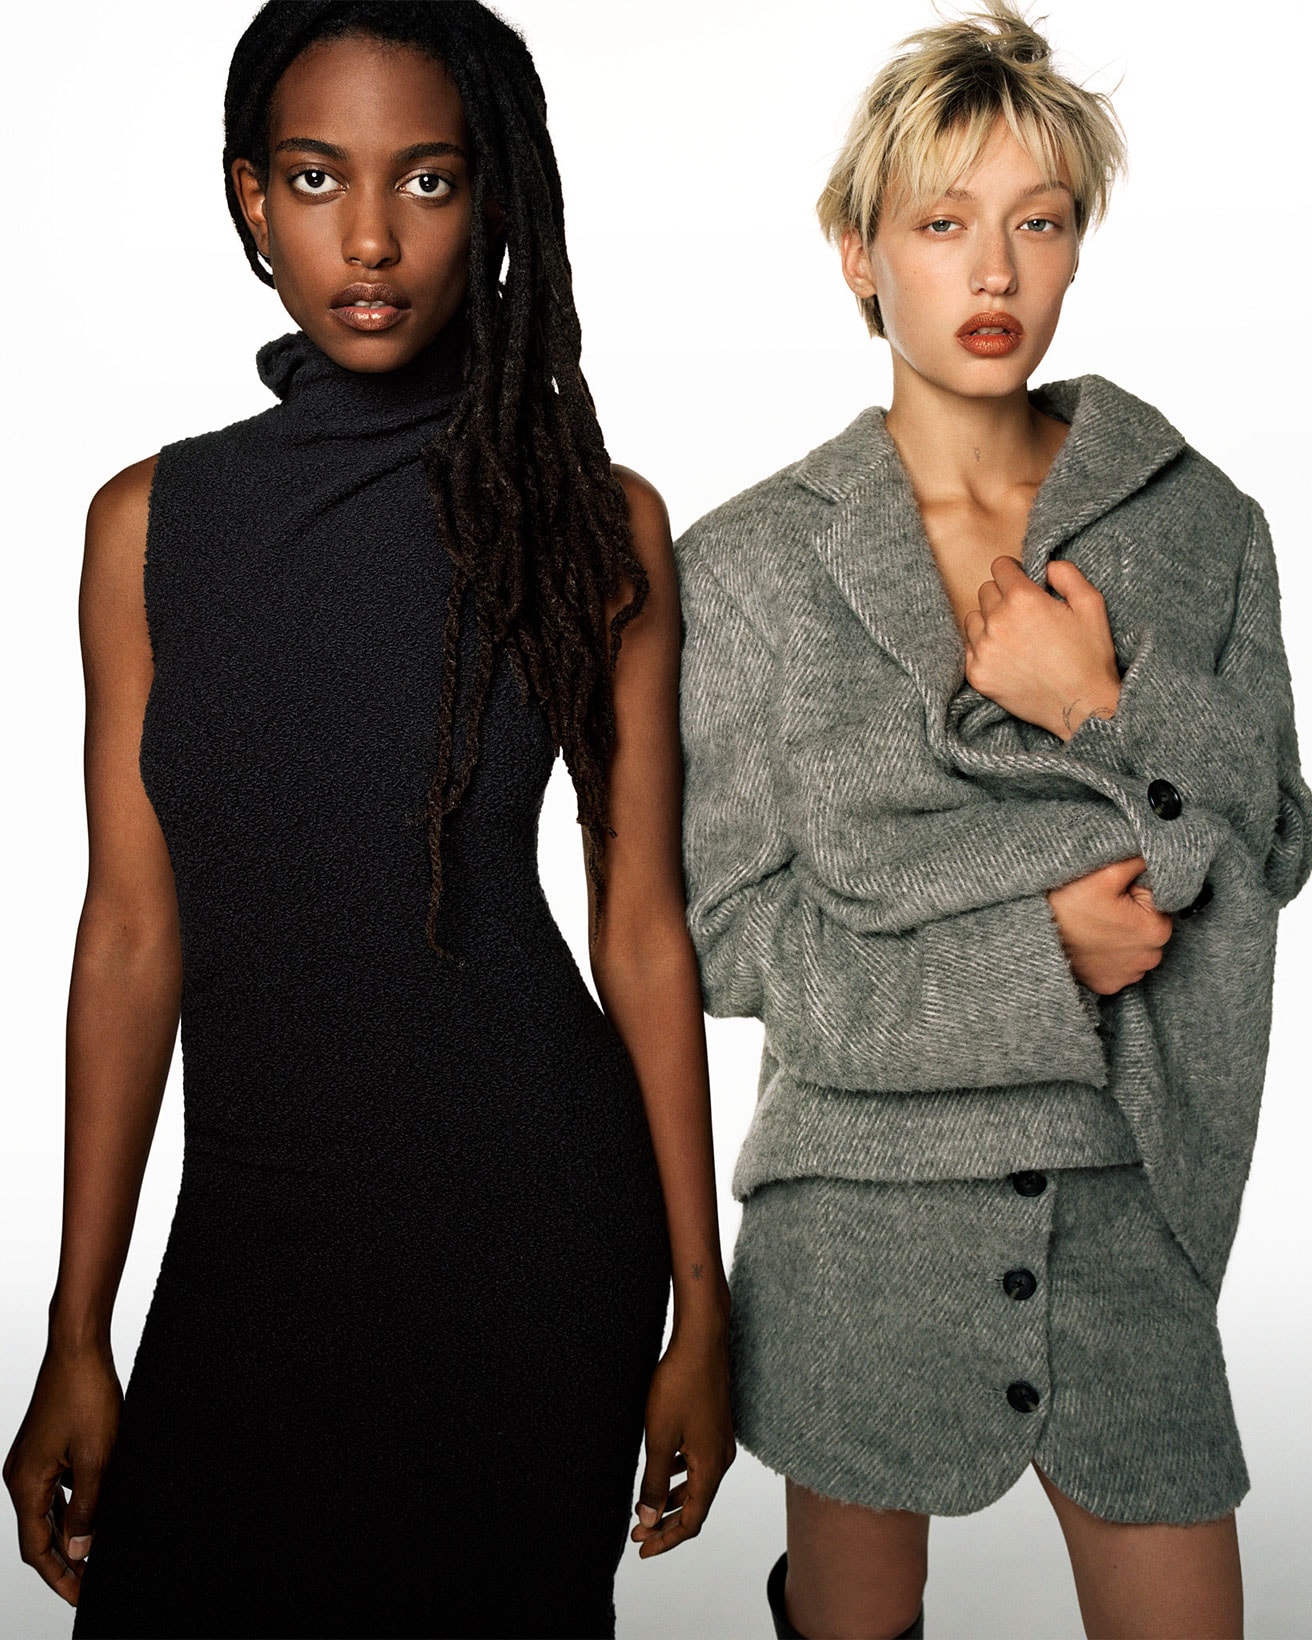 Helmut Lang Resort Collection Suiting Womenswear Hugo Comte Campaign Images